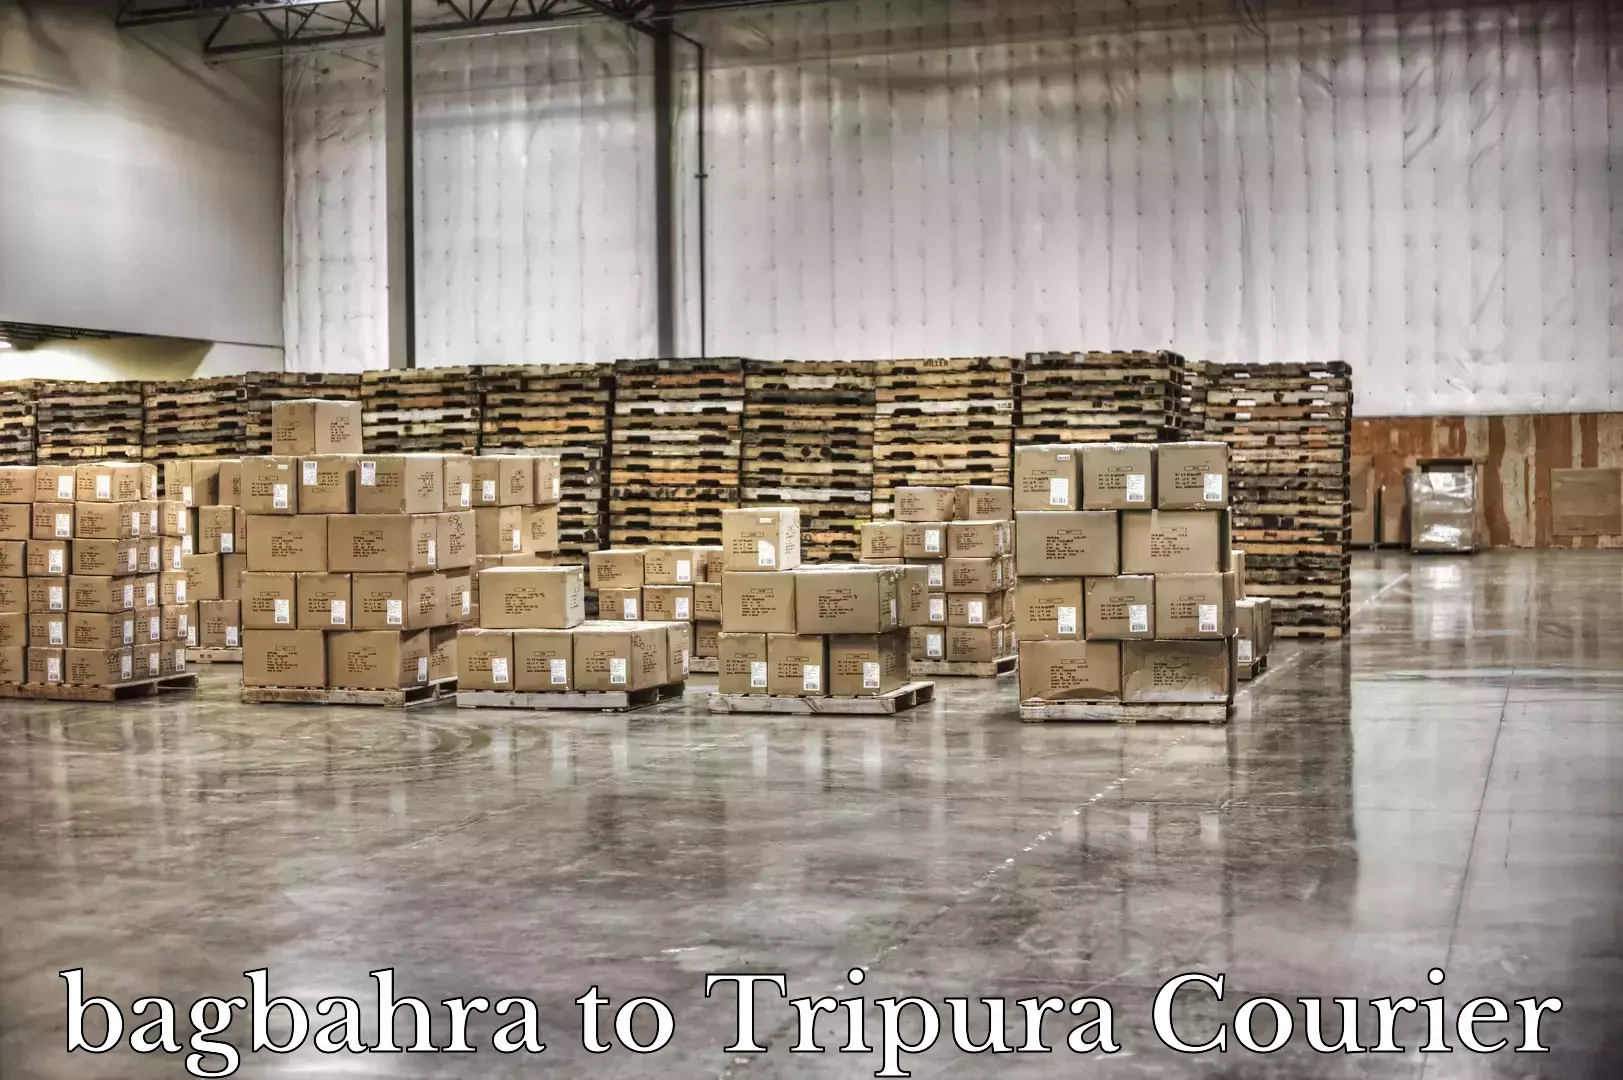 Baggage transport quote in bagbahra to Tripura